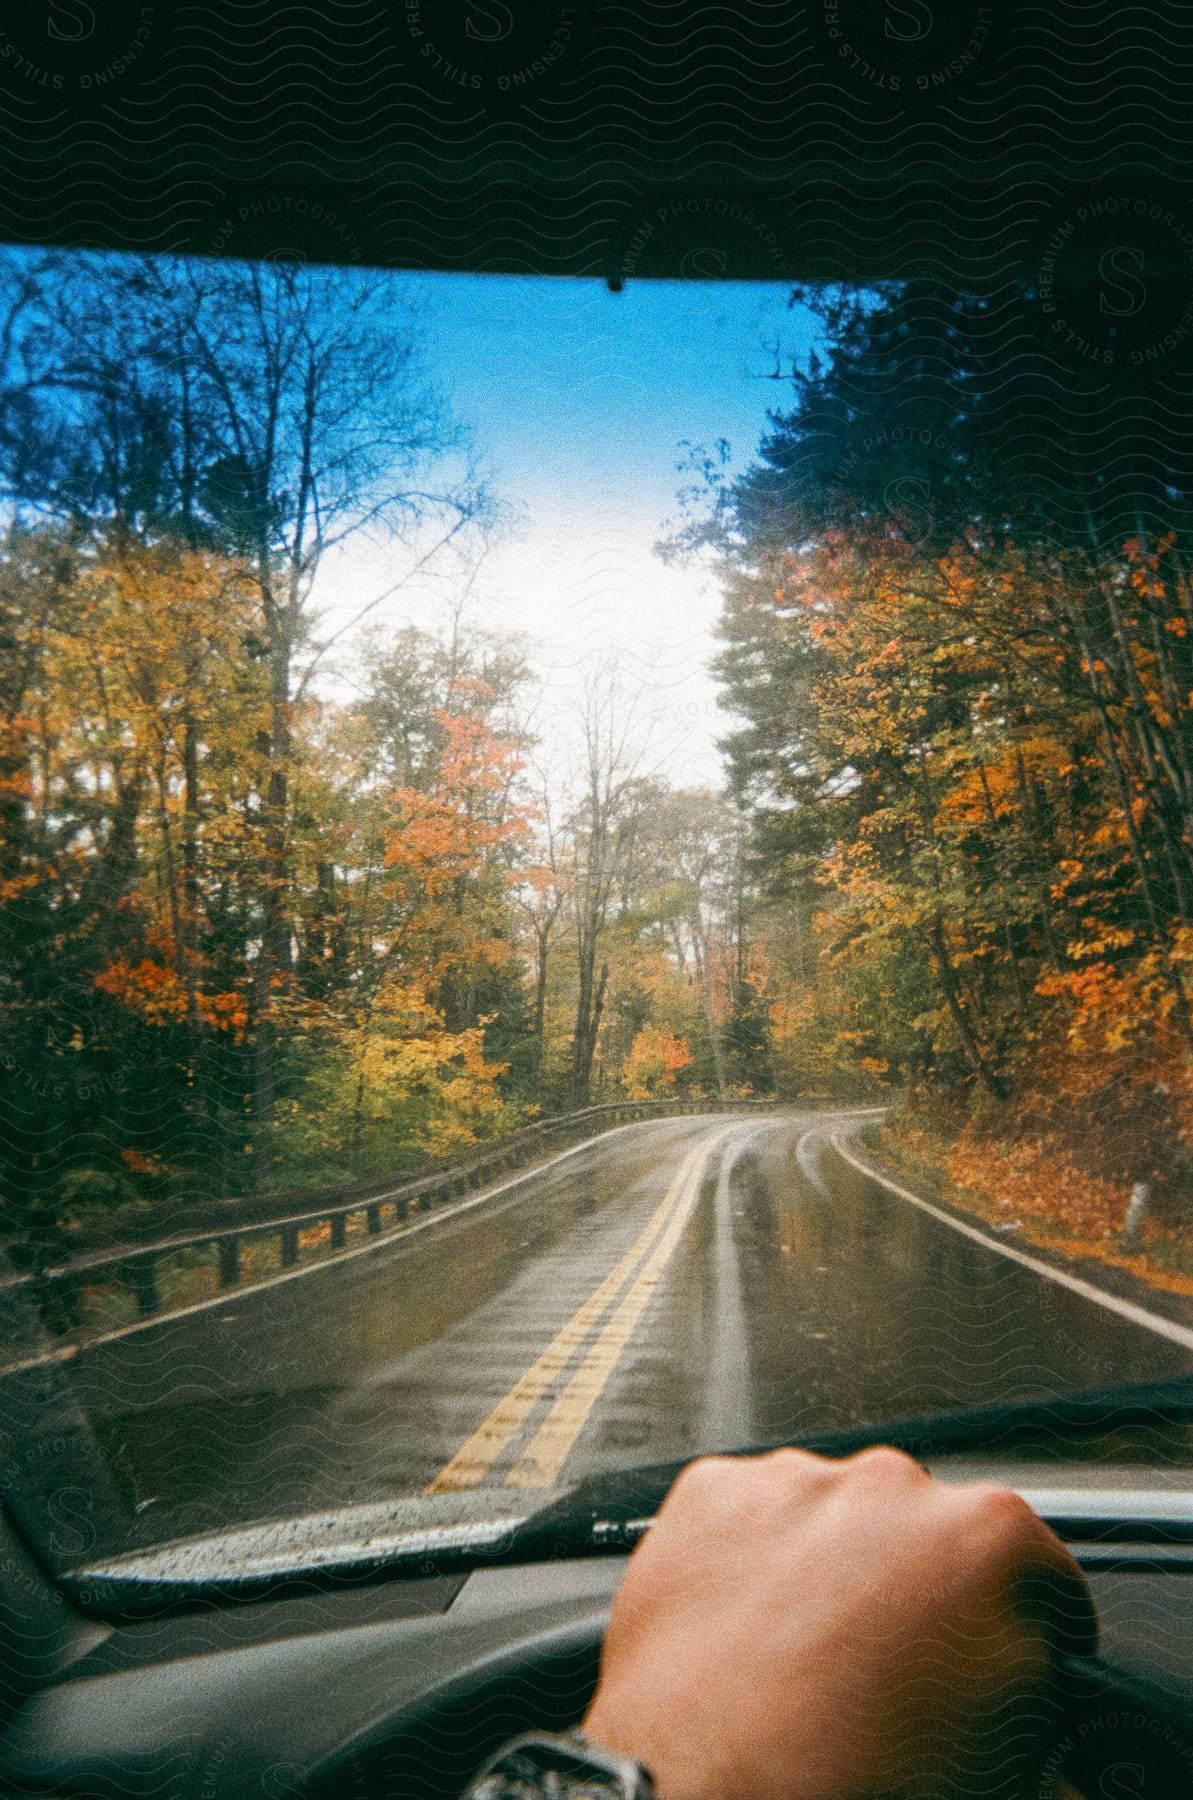 View from inside an automobile as the driver holds the steering wheel on a forested road with trees in fall colors